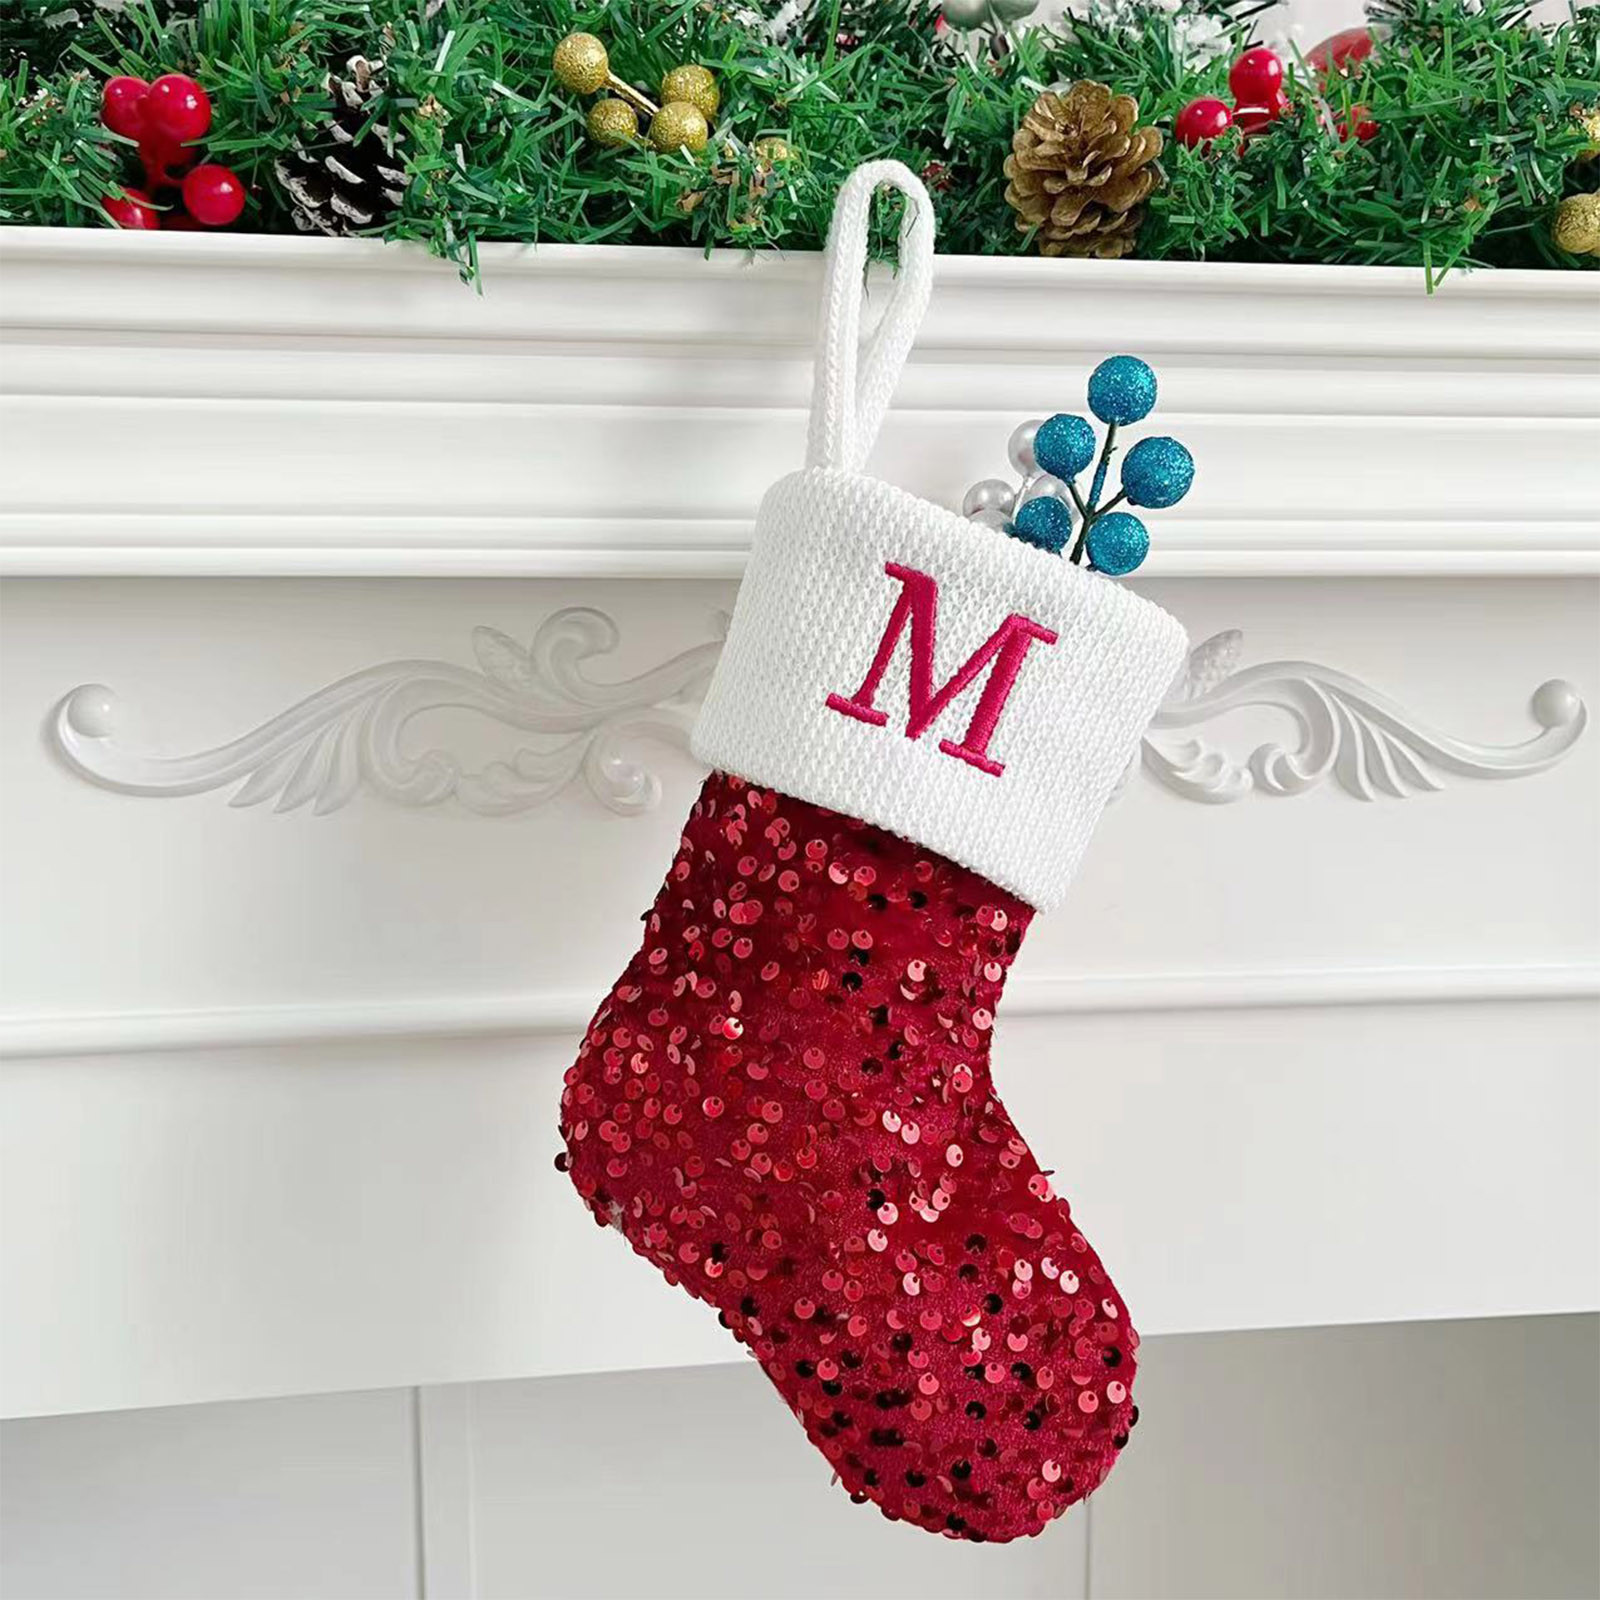 WJHWSX Overstock Items Clearance All Prime Warm Stocking Women